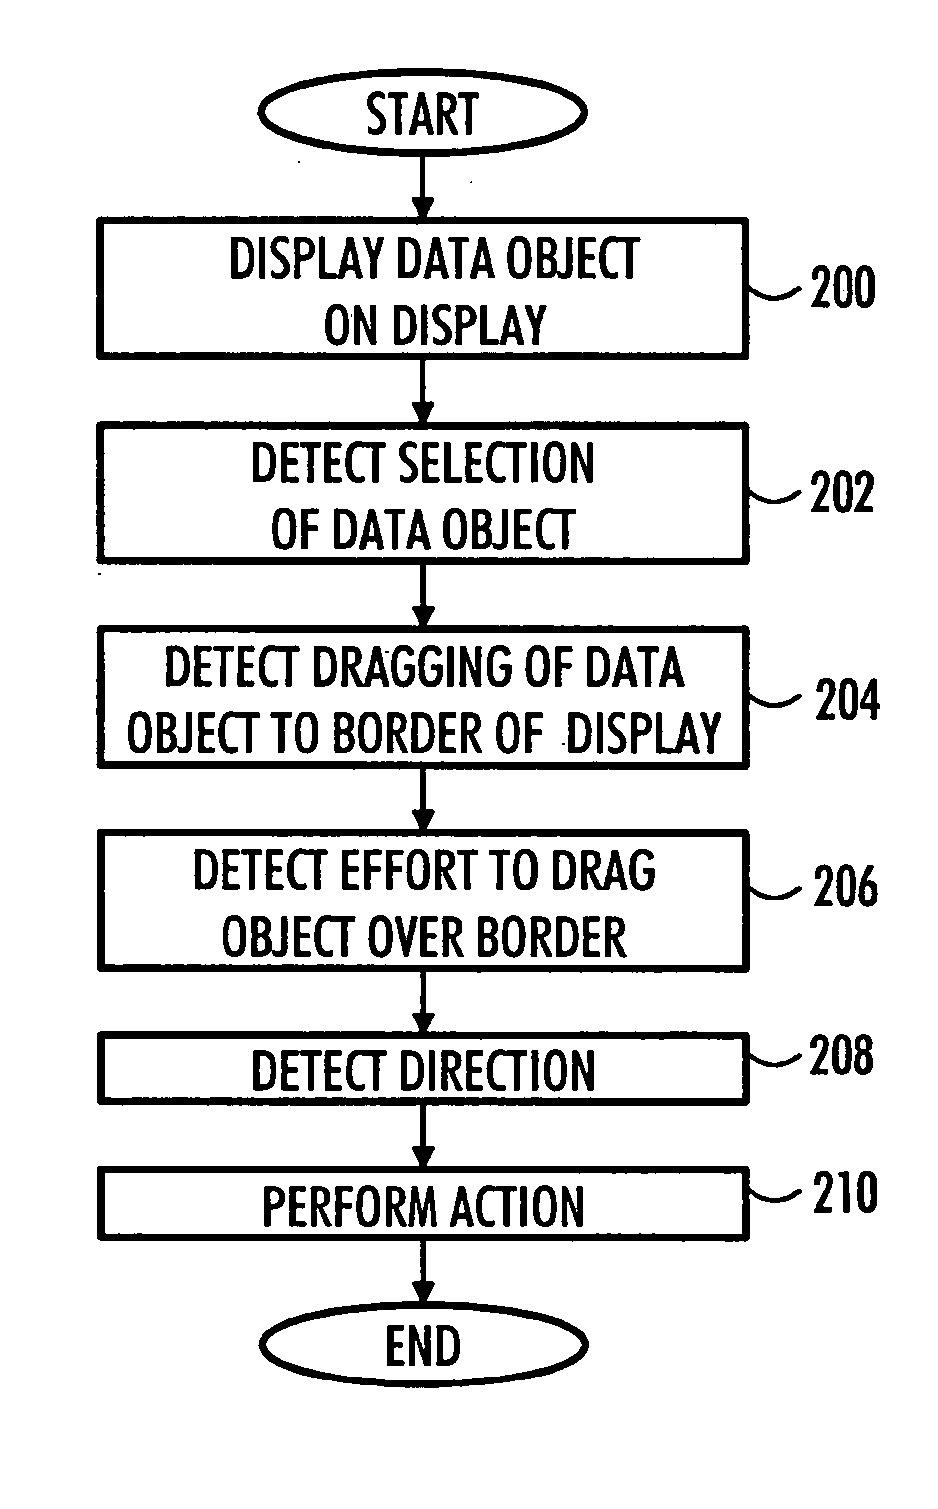 Electronic device and method for providing extended user interface